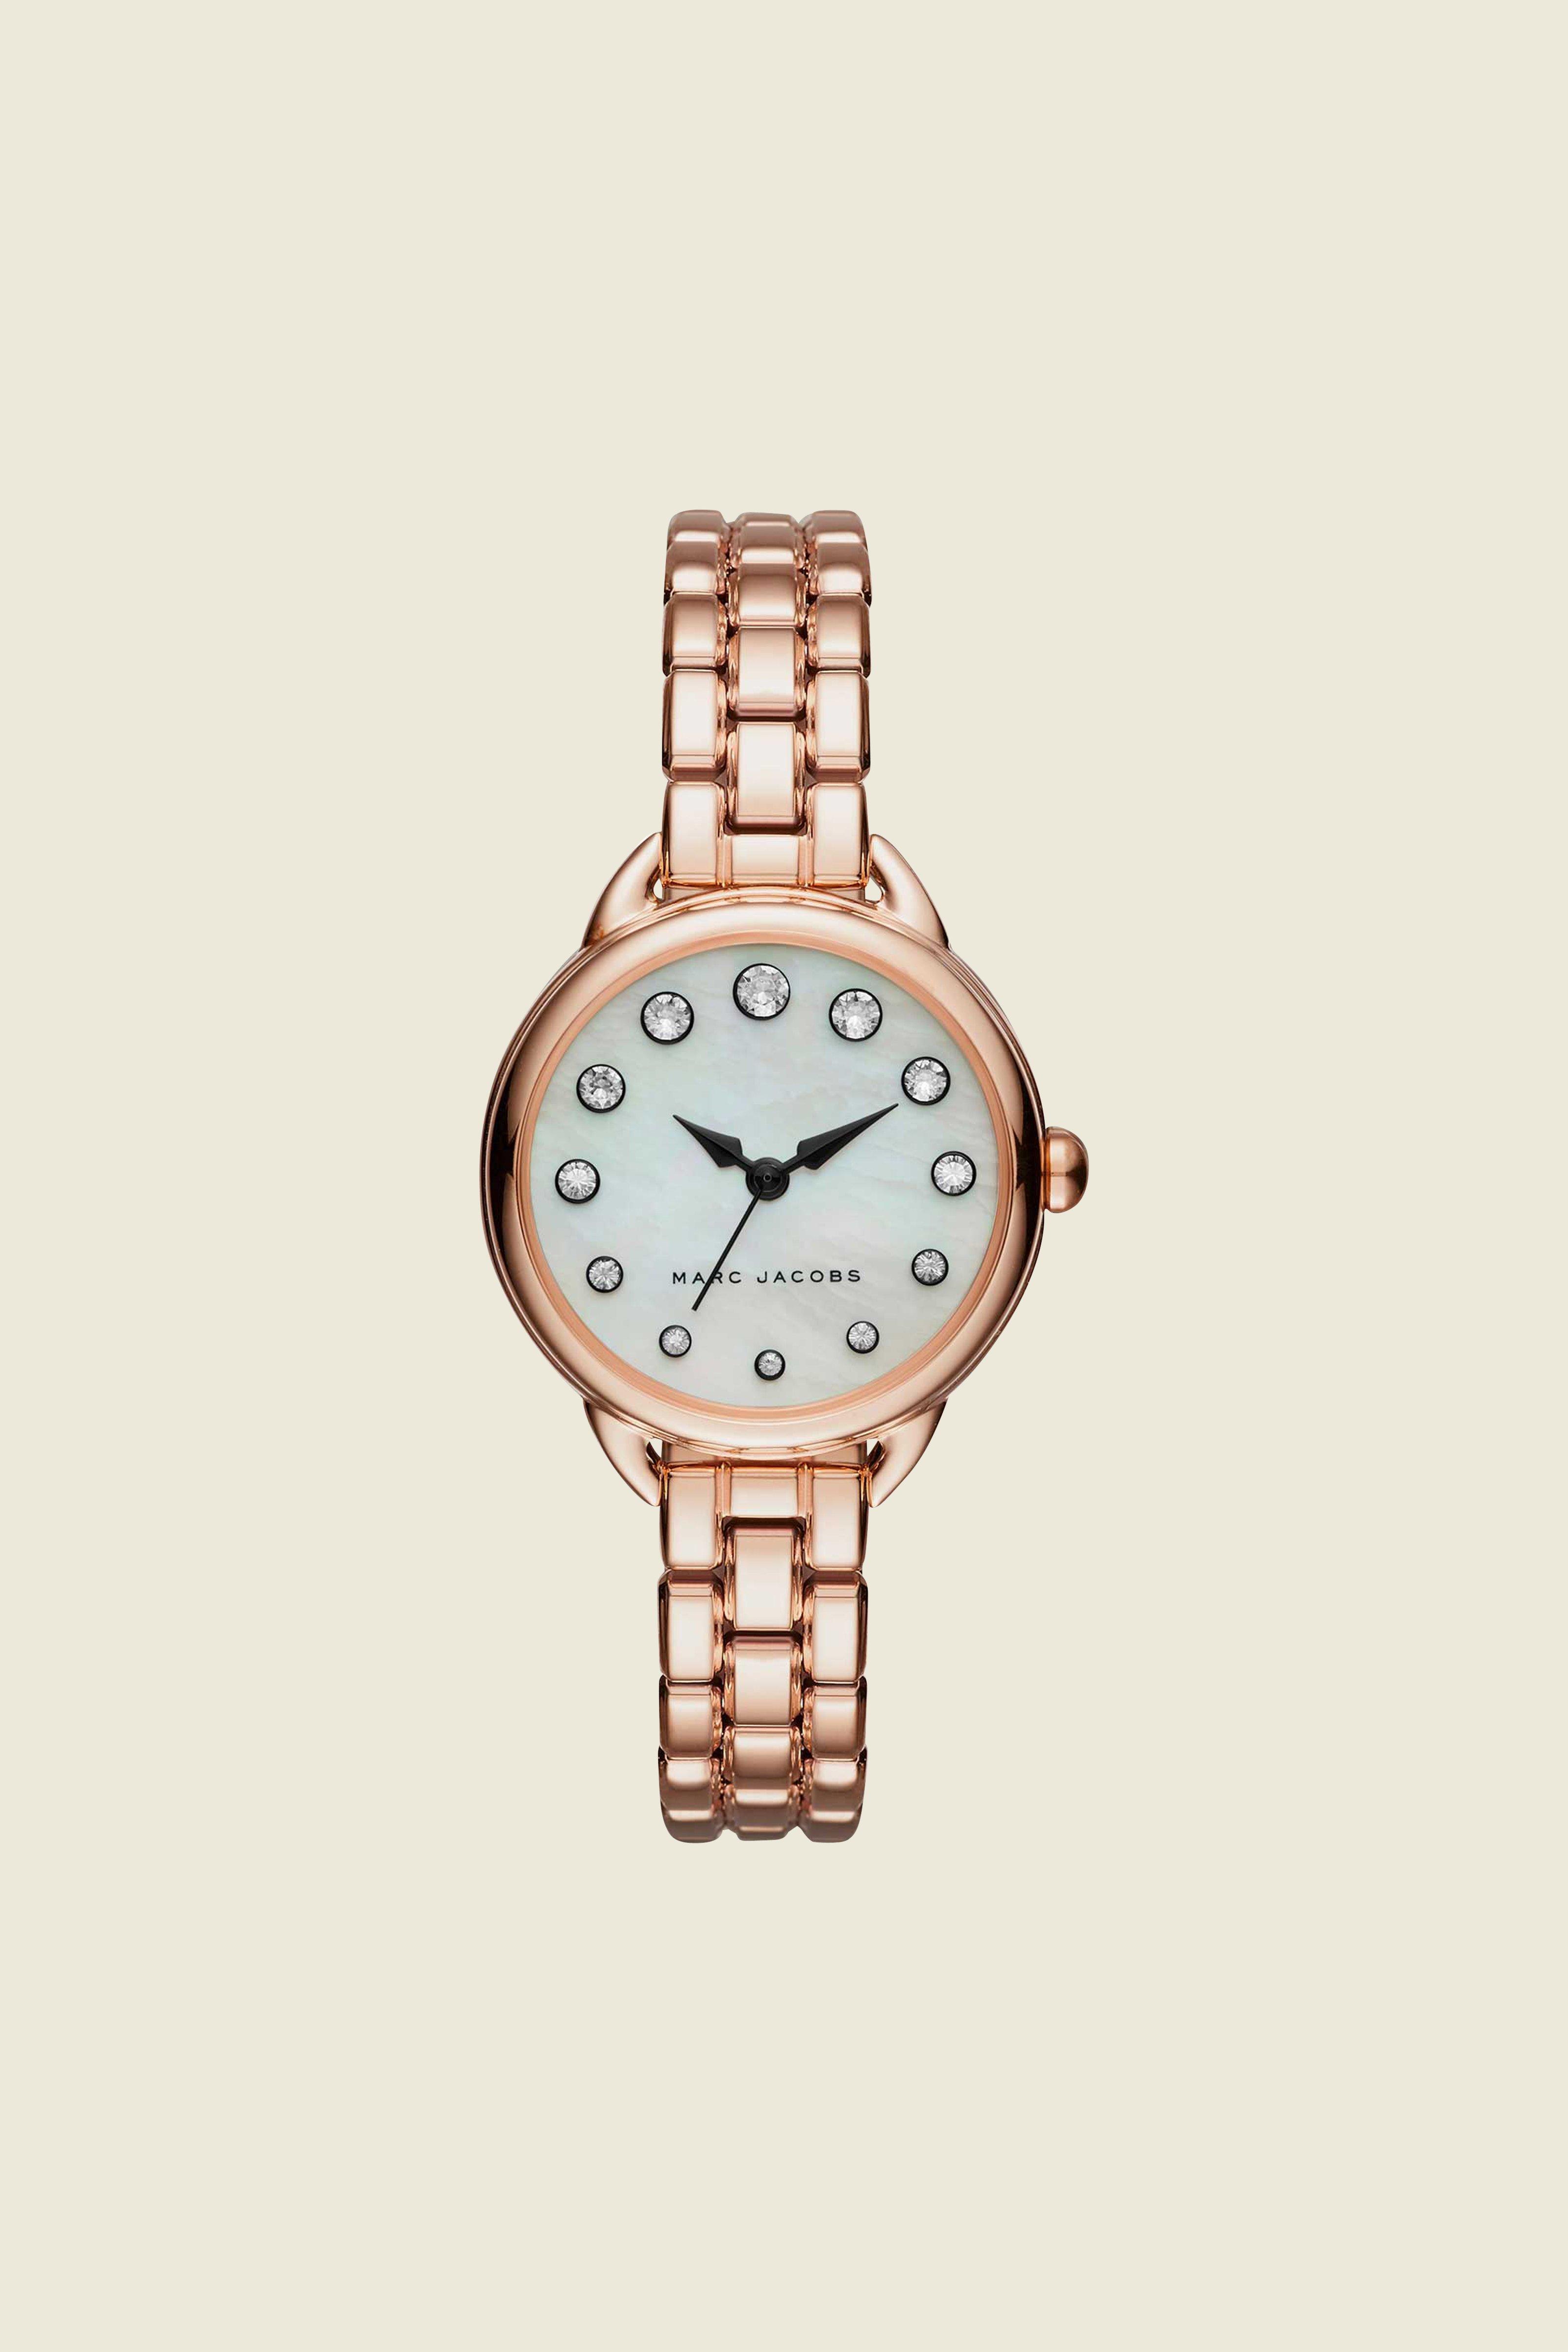 Lyst - Marc Jacobs The Betty Watch 28mm